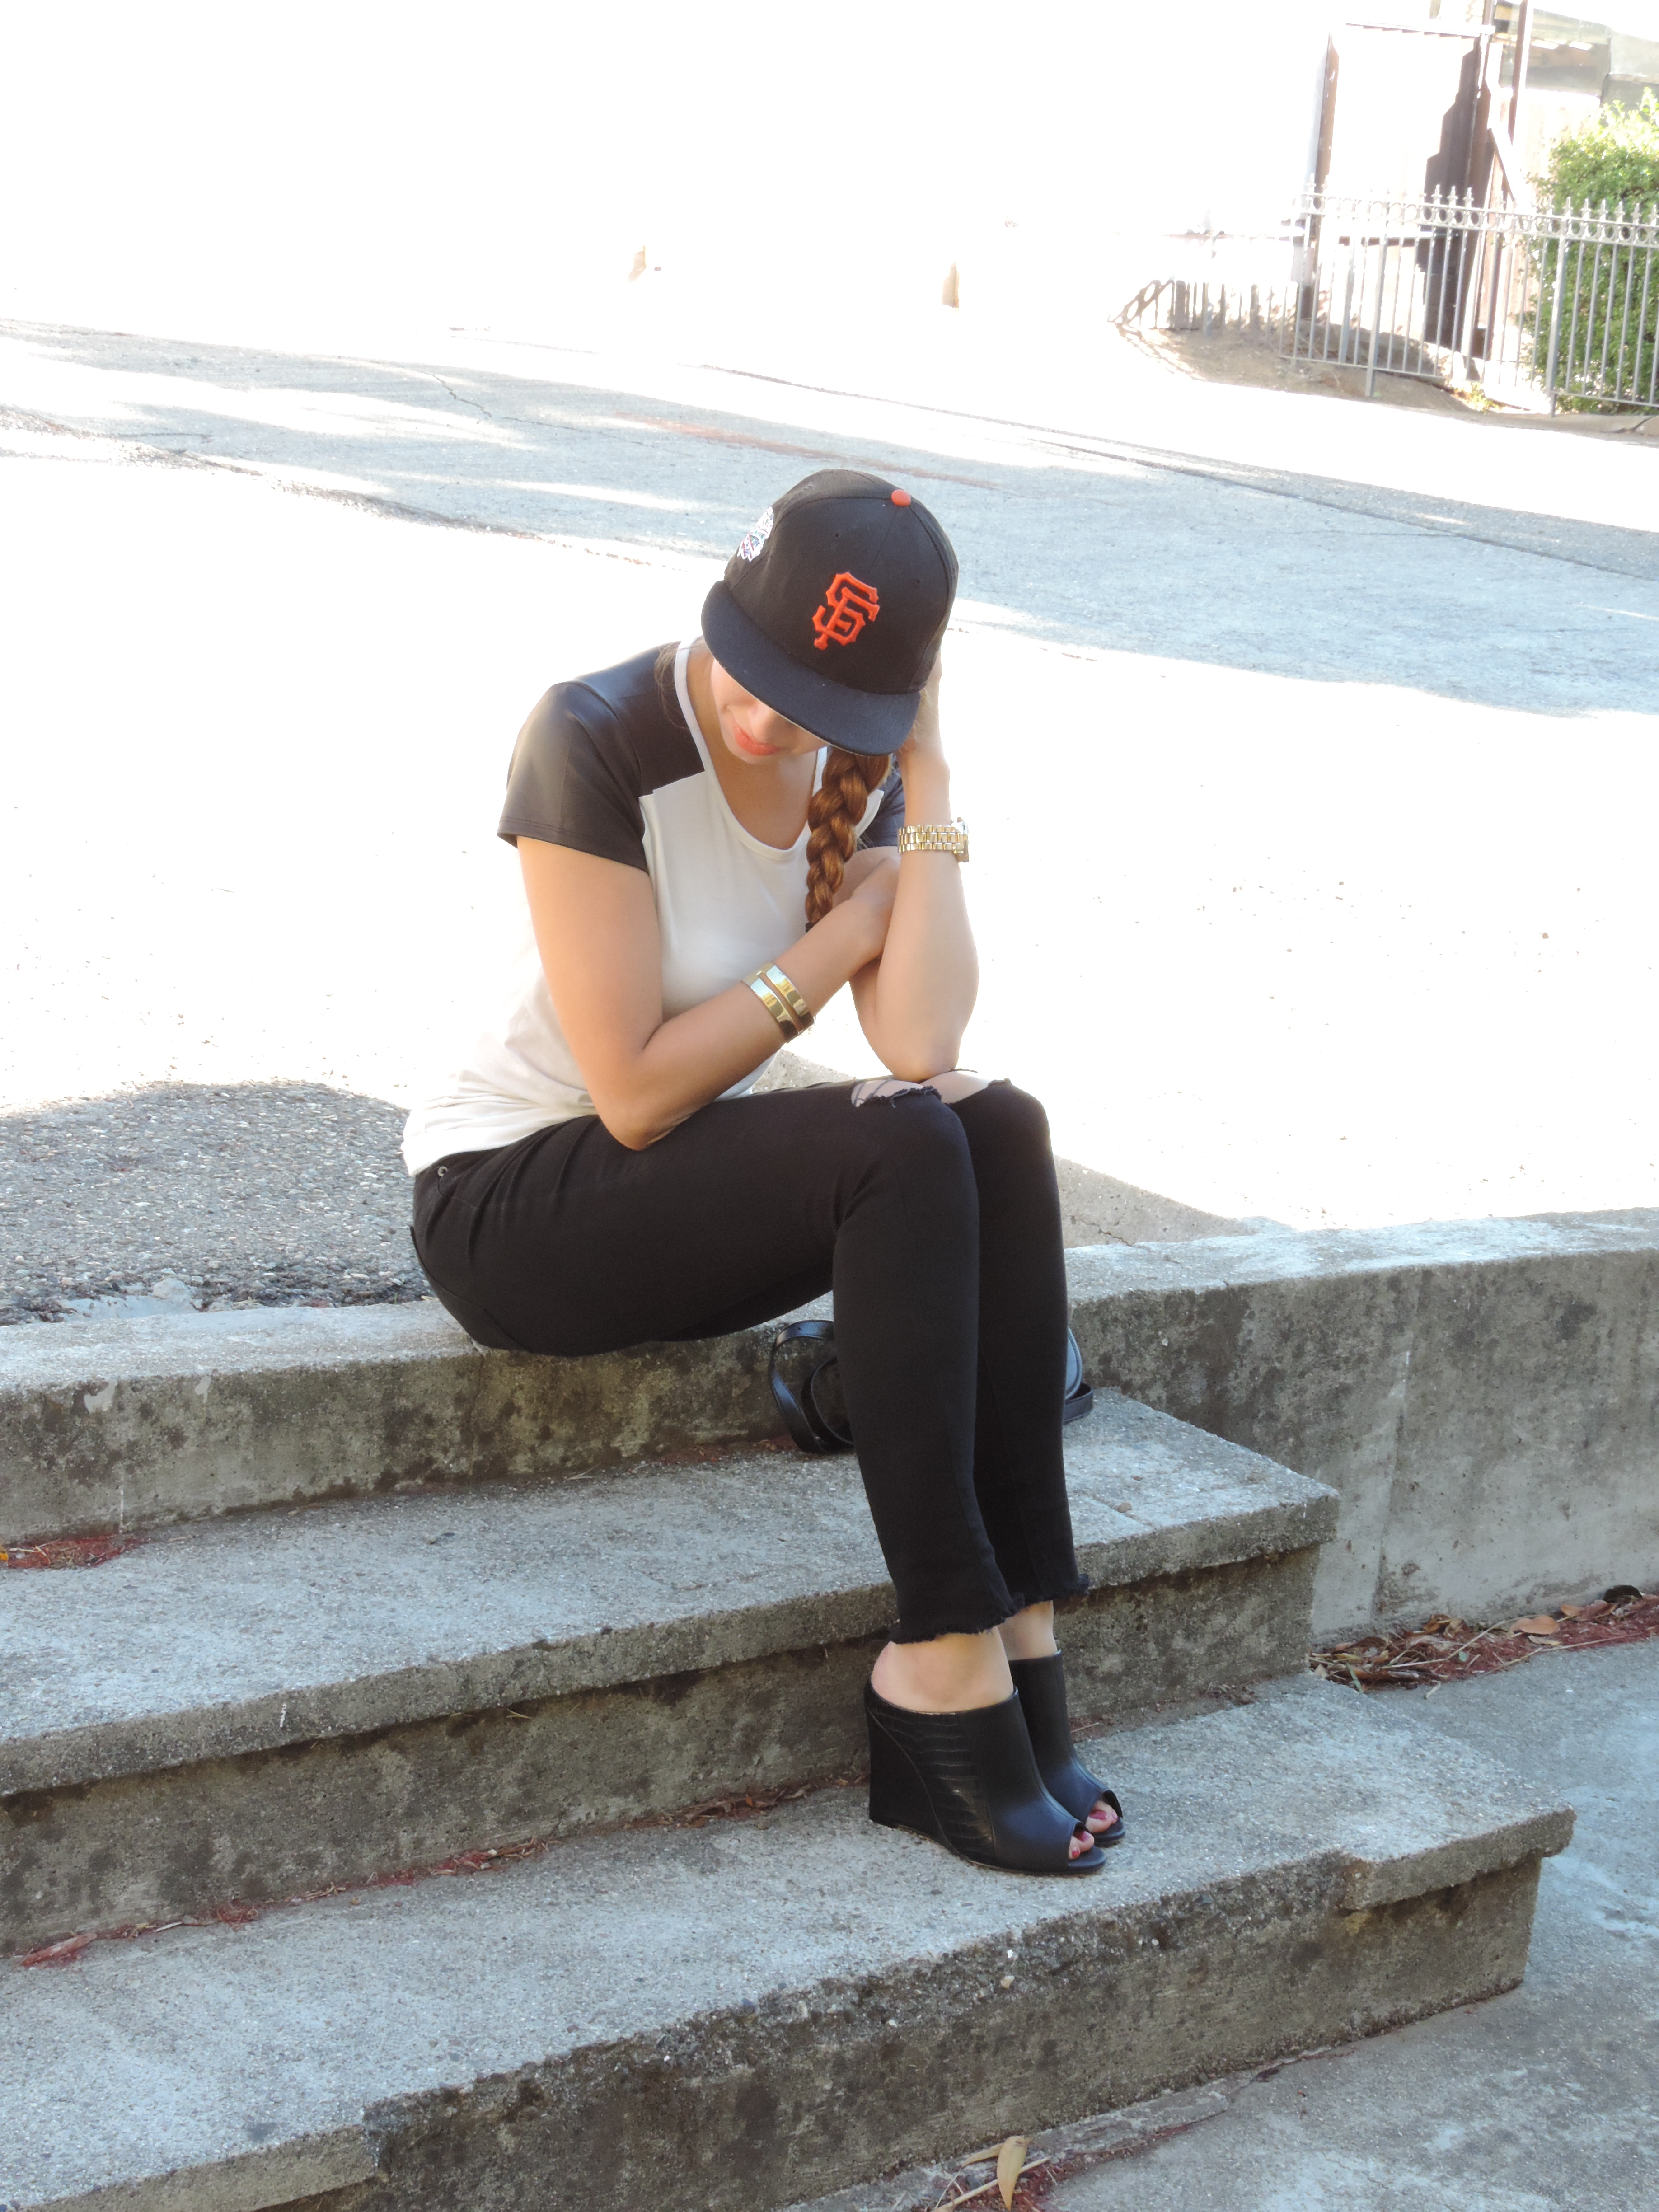 sf giants hat outfit